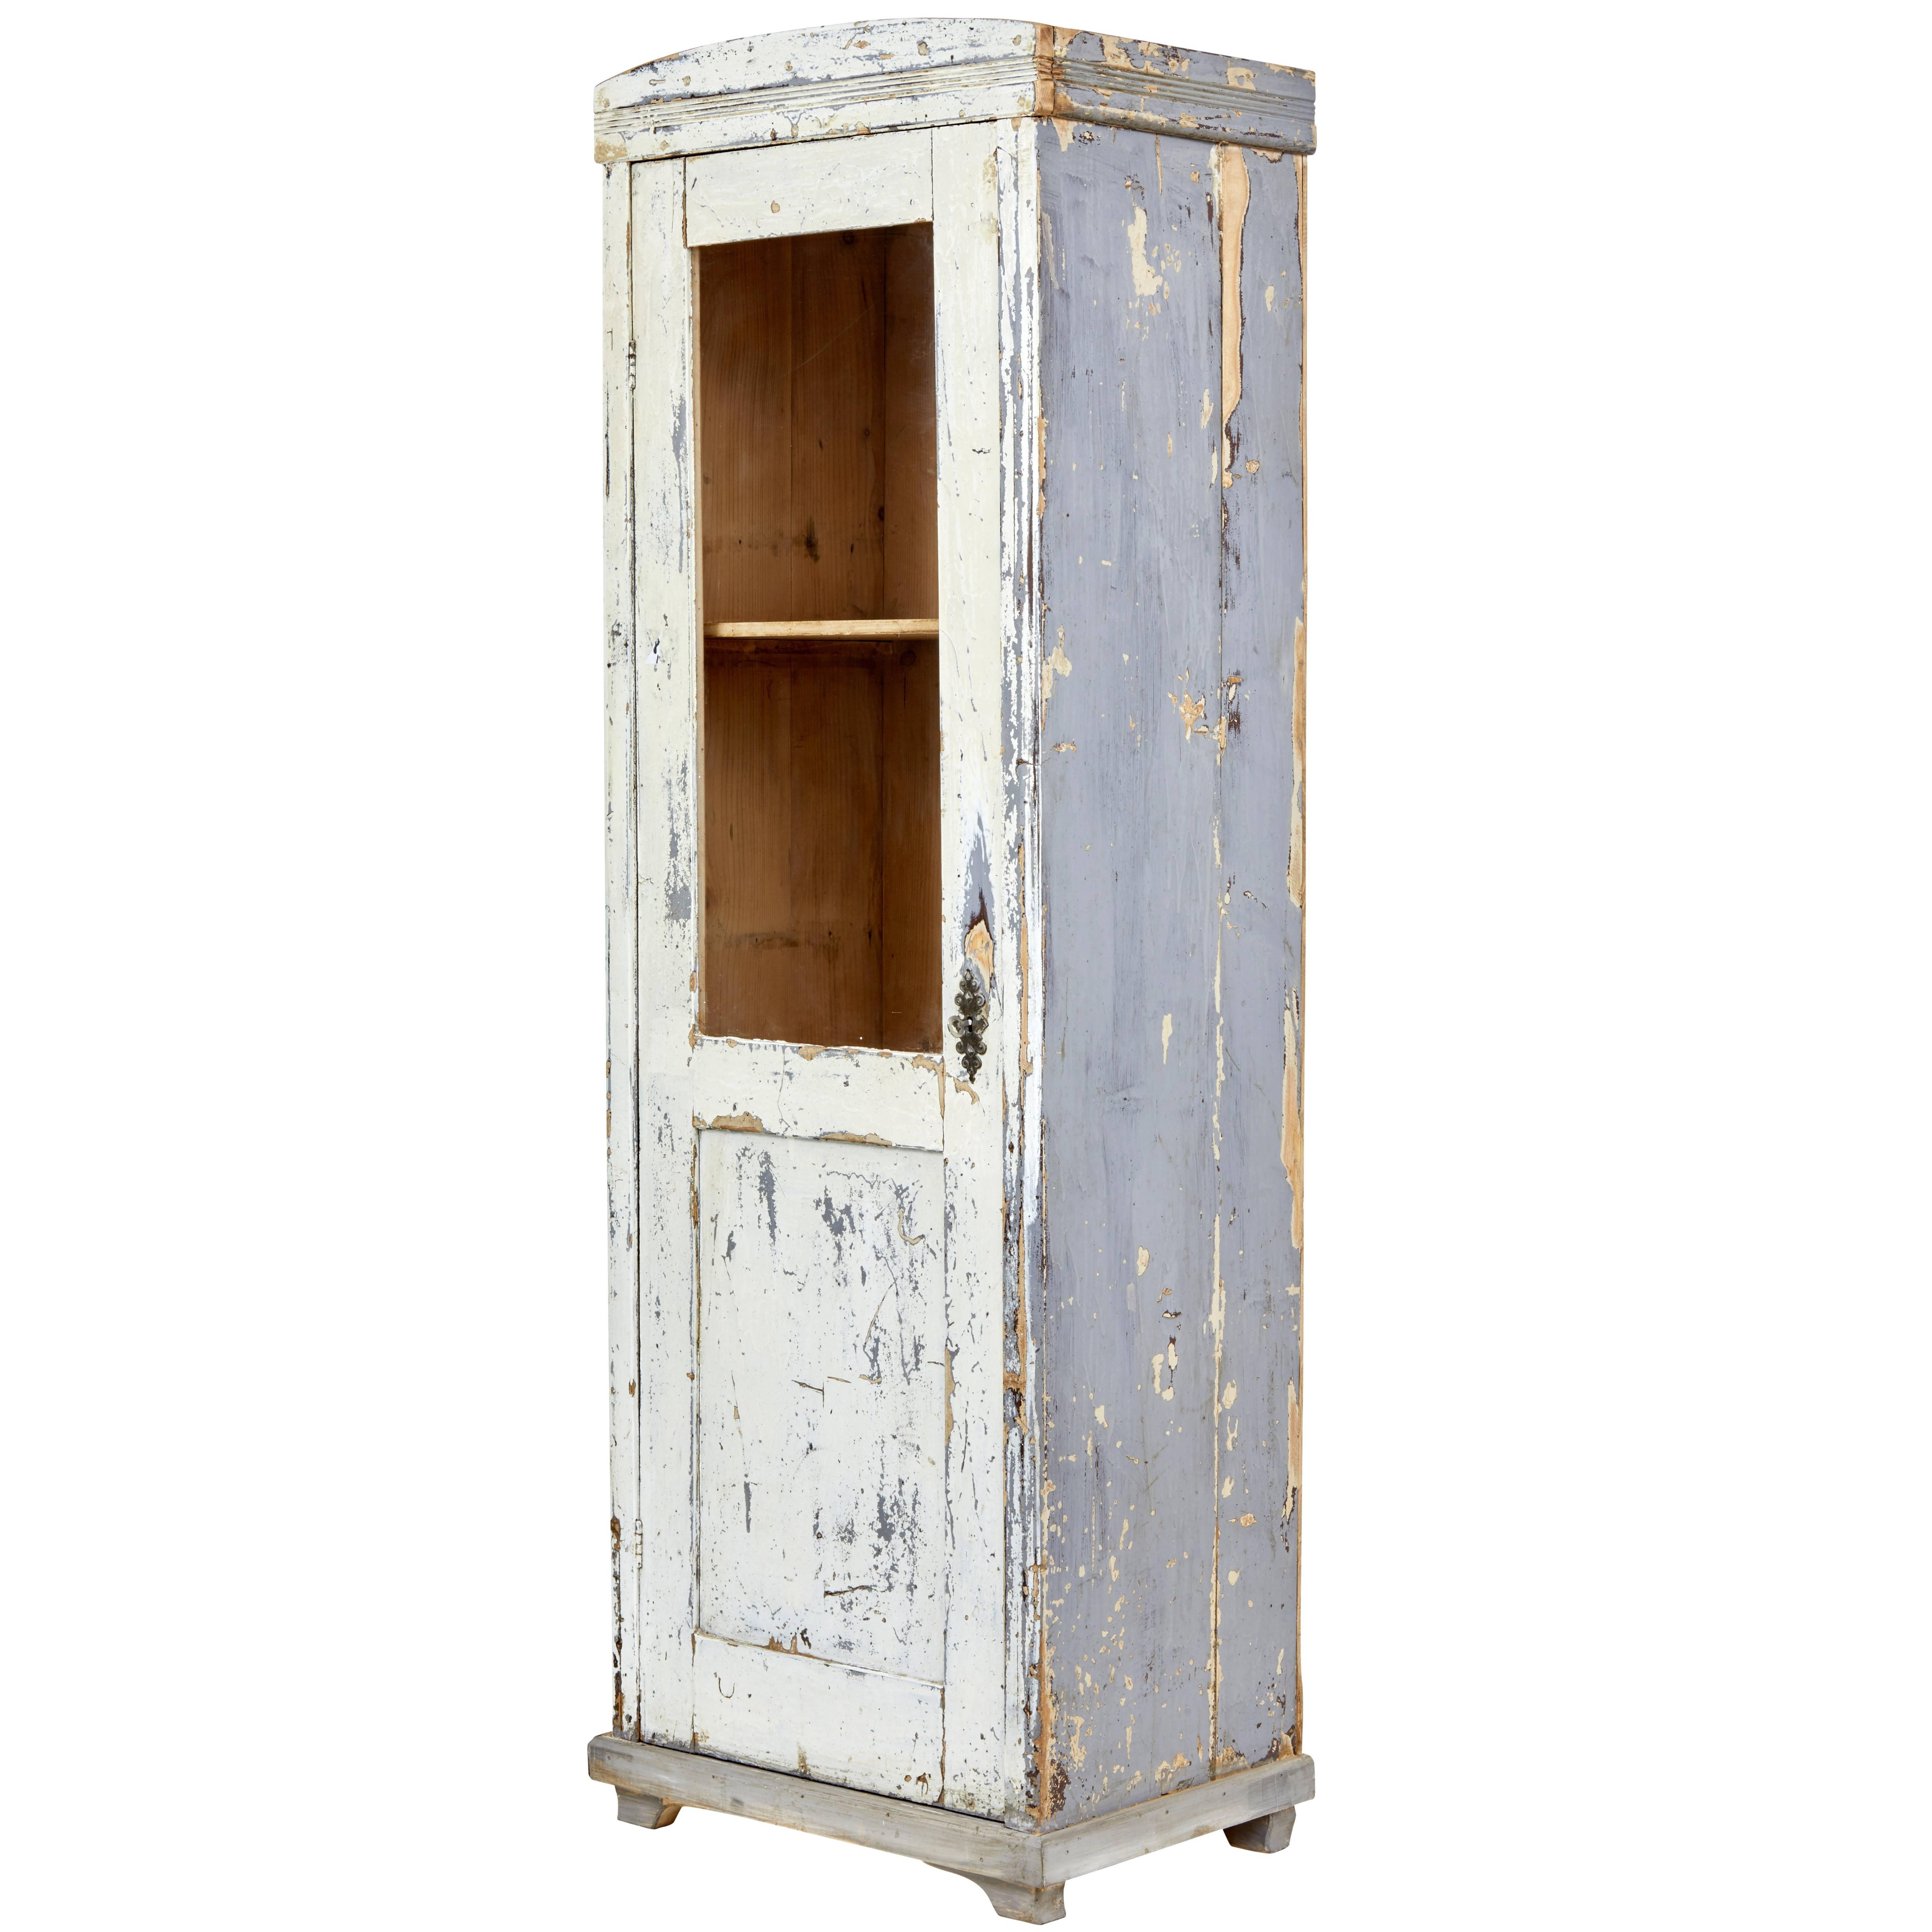 Late 19th Century Rustic Painted Pine Cabinet